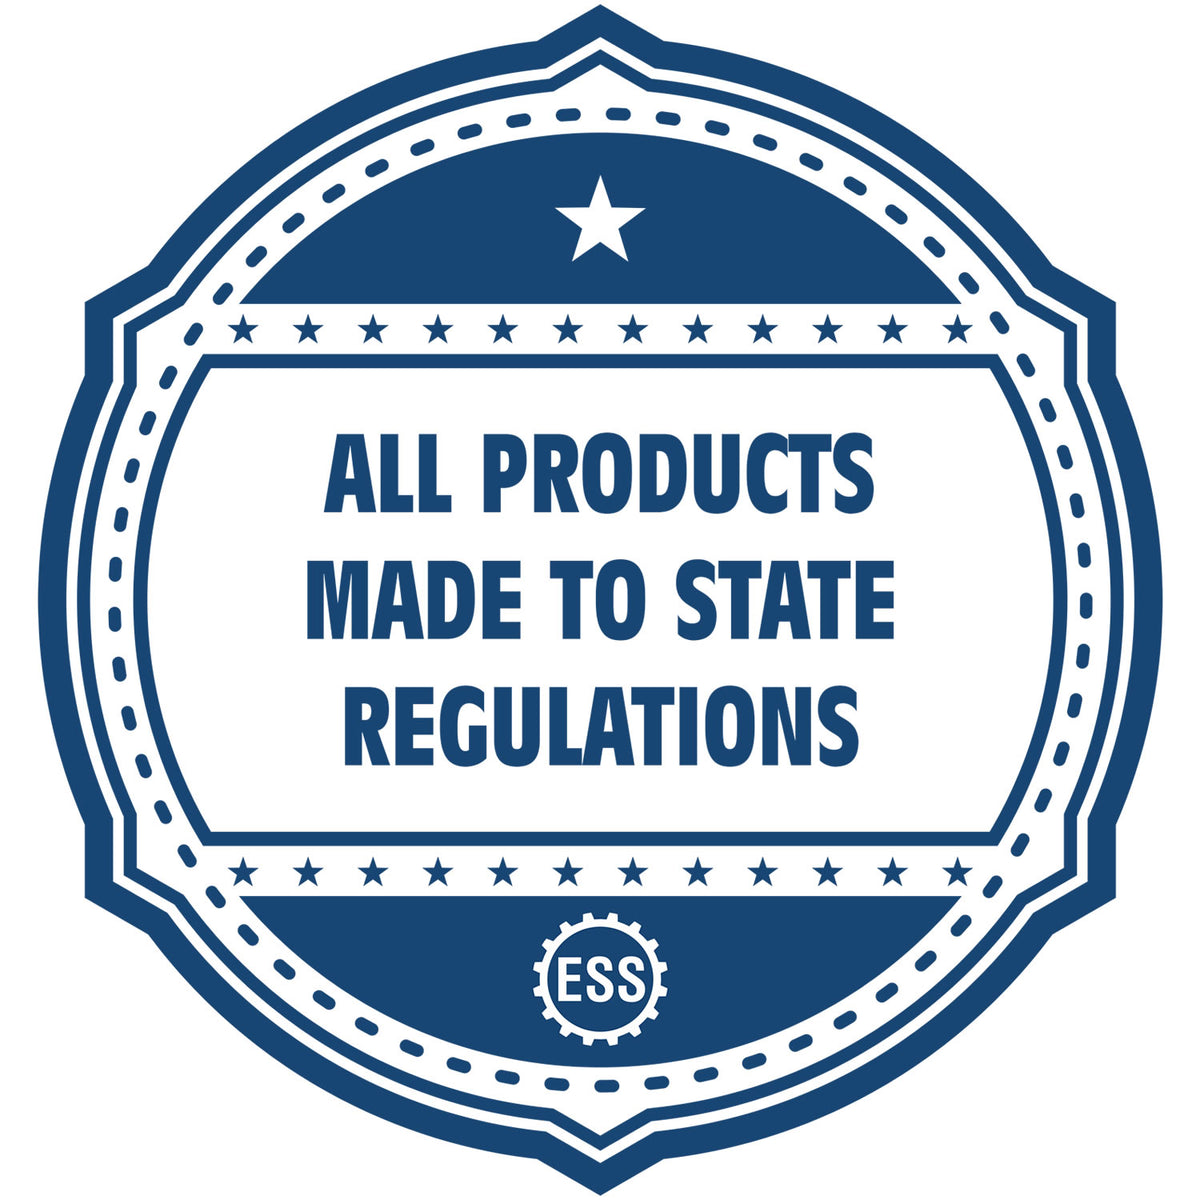 An icon or badge element for the Heavy Duty Cast Iron Colorado Architect Embosser showing that this product is made in compliance with state regulations.